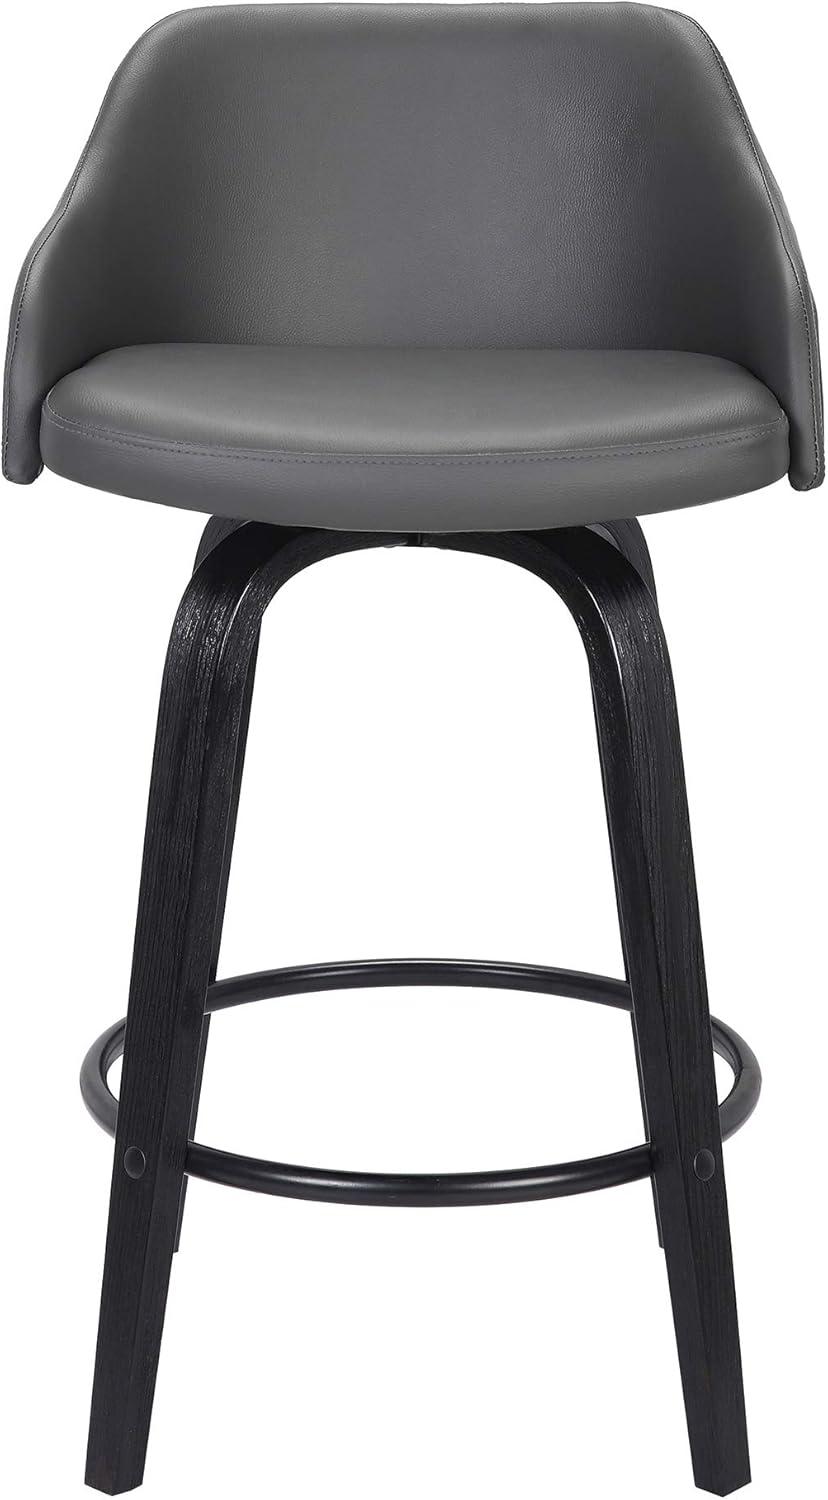 Alec Contemporary Black Wood & Grey Faux Leather Swivel Barstool, 30"